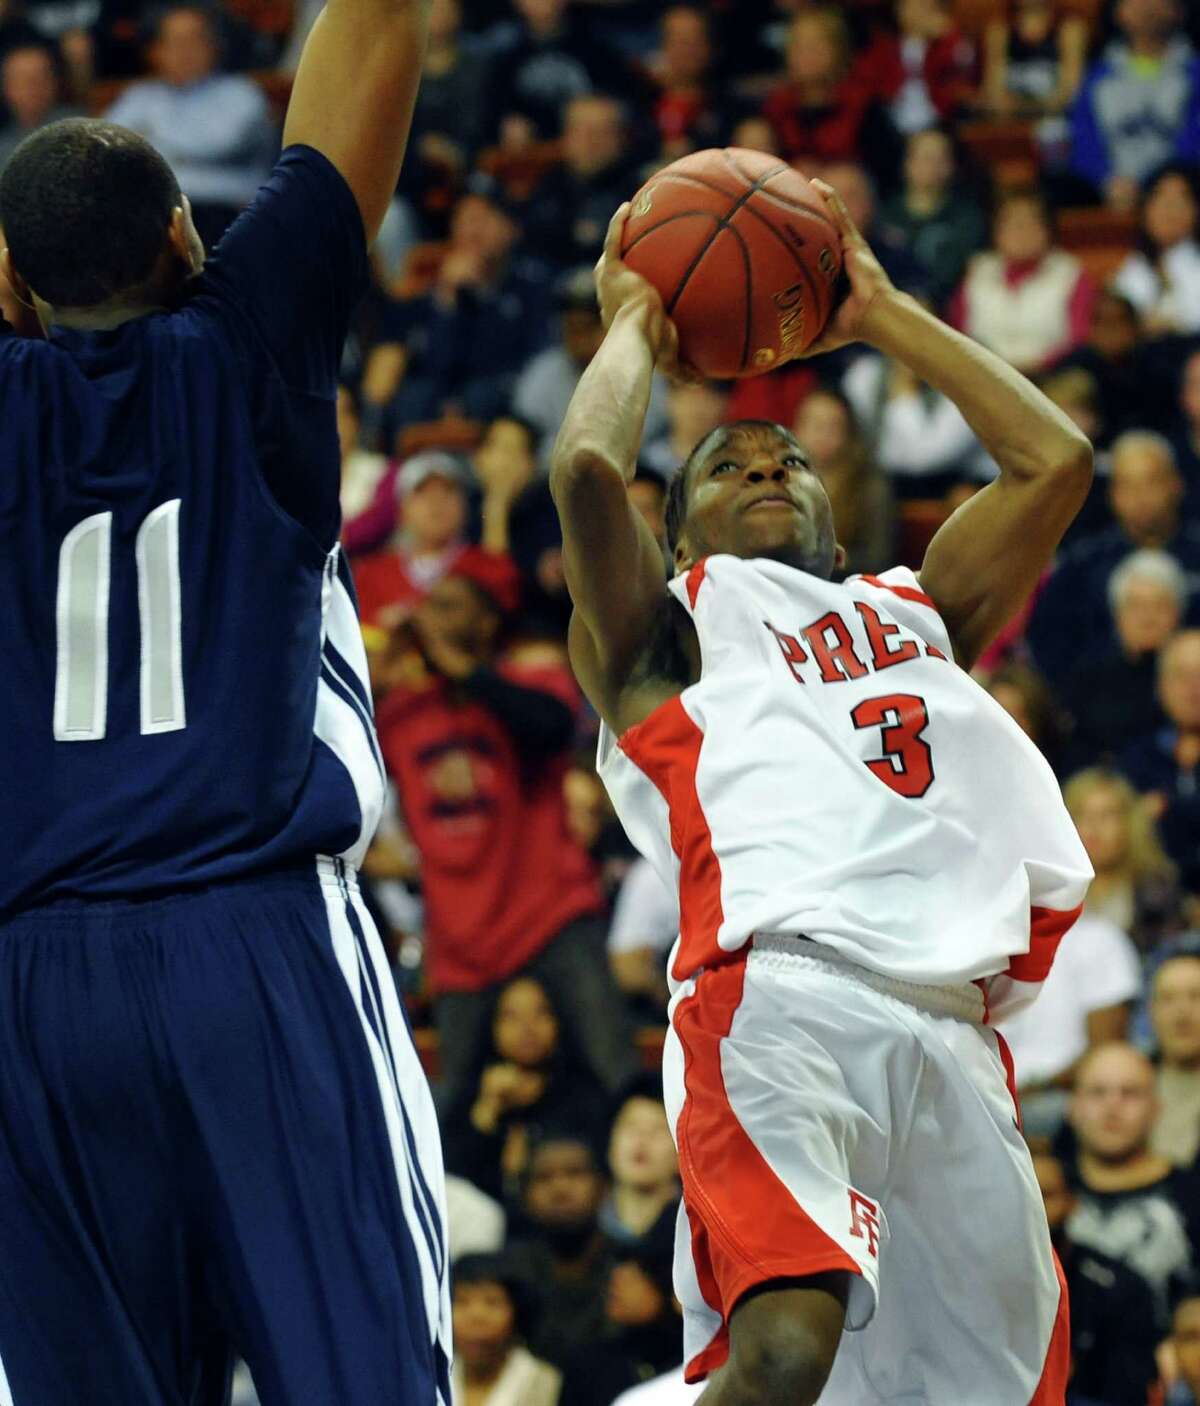 Fairfield Prep's #3 Keith Pettway looks for two points, during Class LL boys basketball final action against Hillhouse in Uncasville, Conn. on Saturday March 16, 2013.